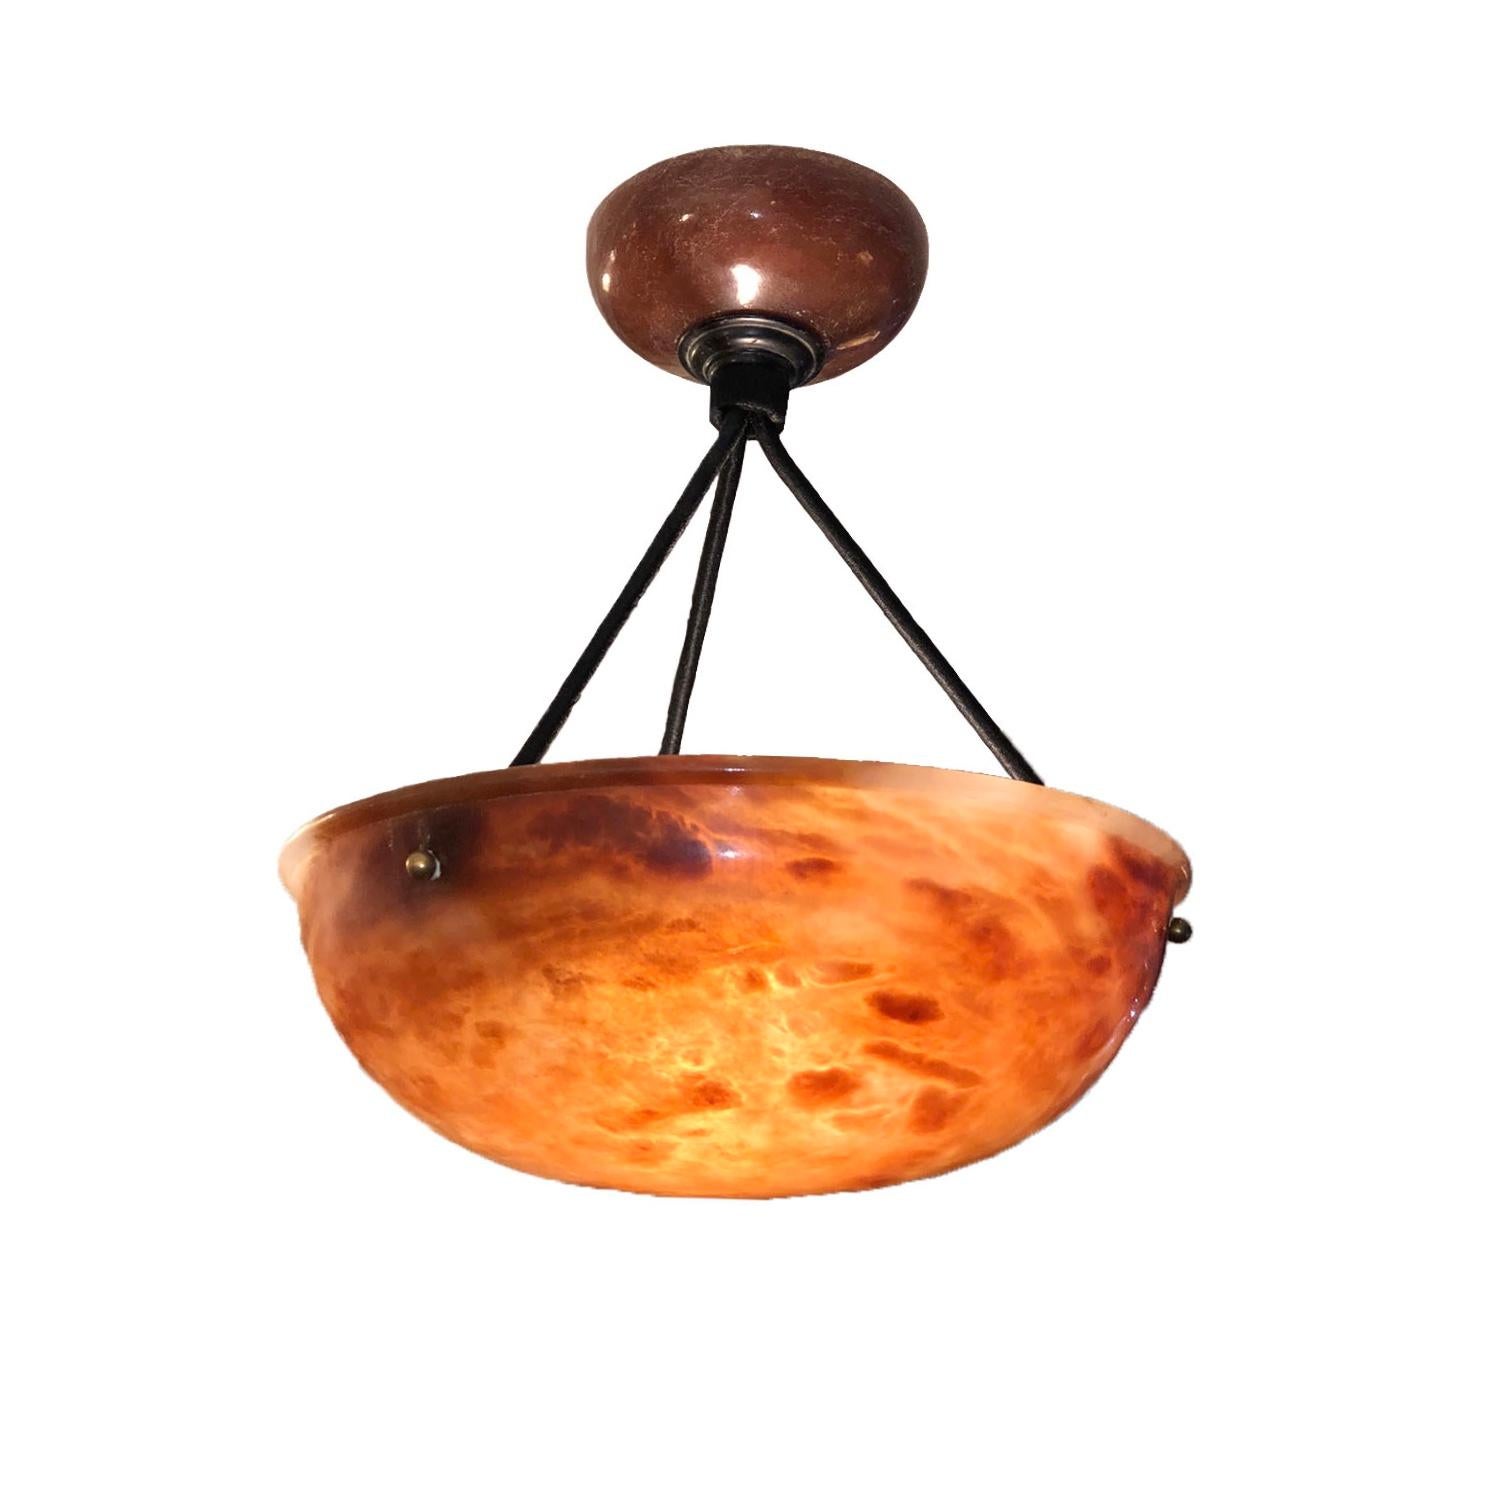 Carved from the same block of amber alabaster, this pair of 12 inch diameter lights mounts three bulbs each and can be altered to any drop required free of charge. Rope color may also be changed if desired.